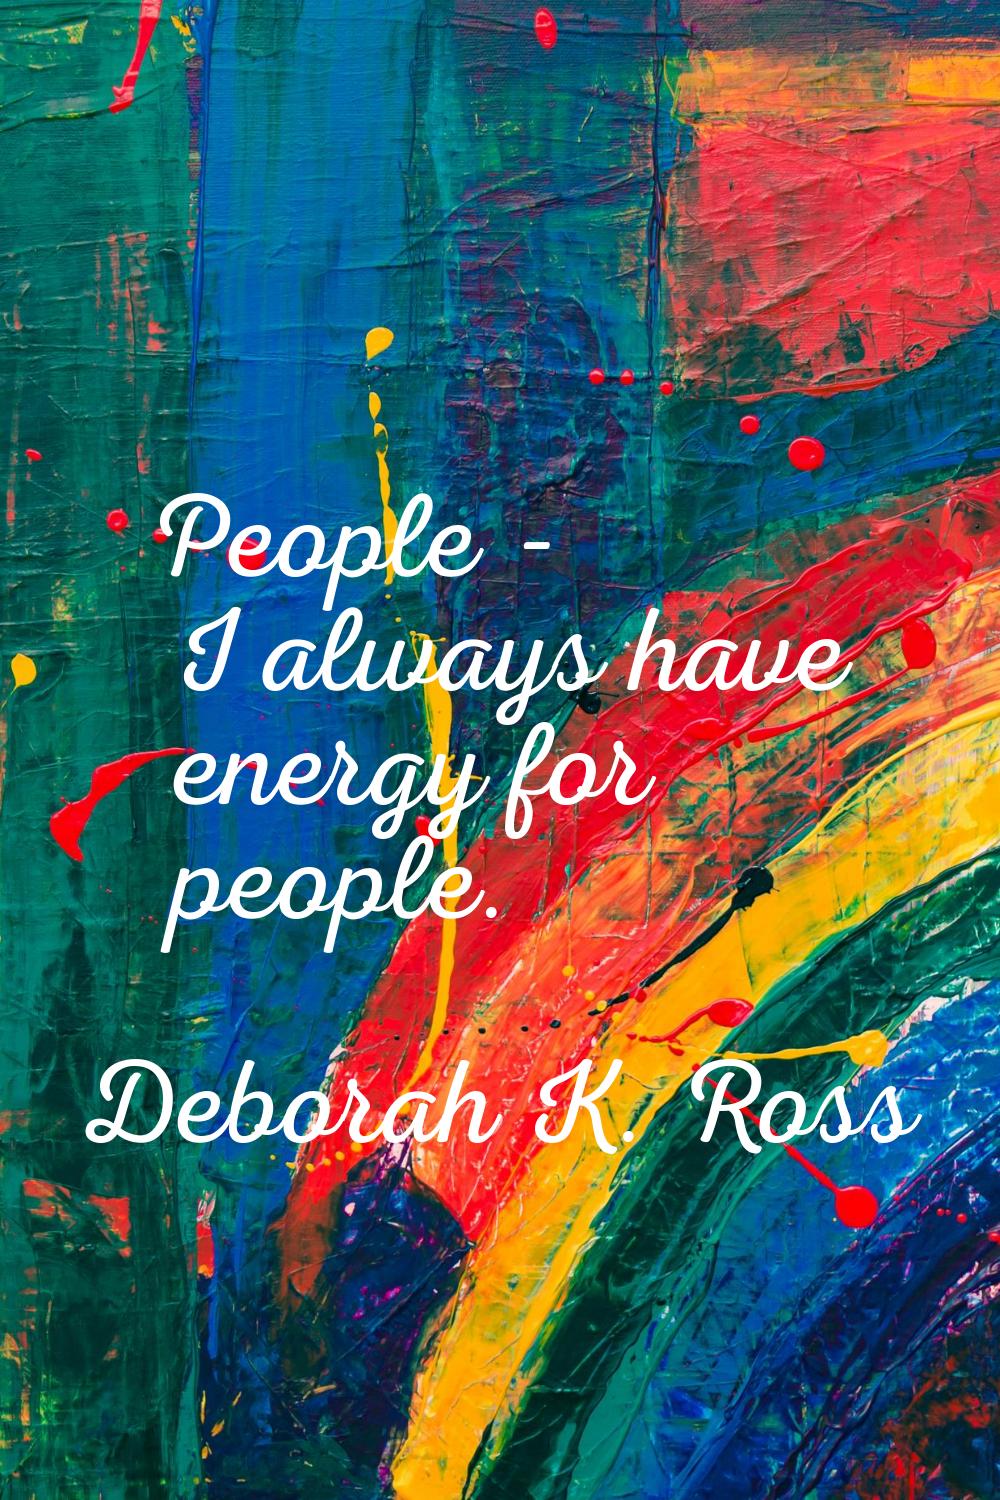 People - I always have energy for people.